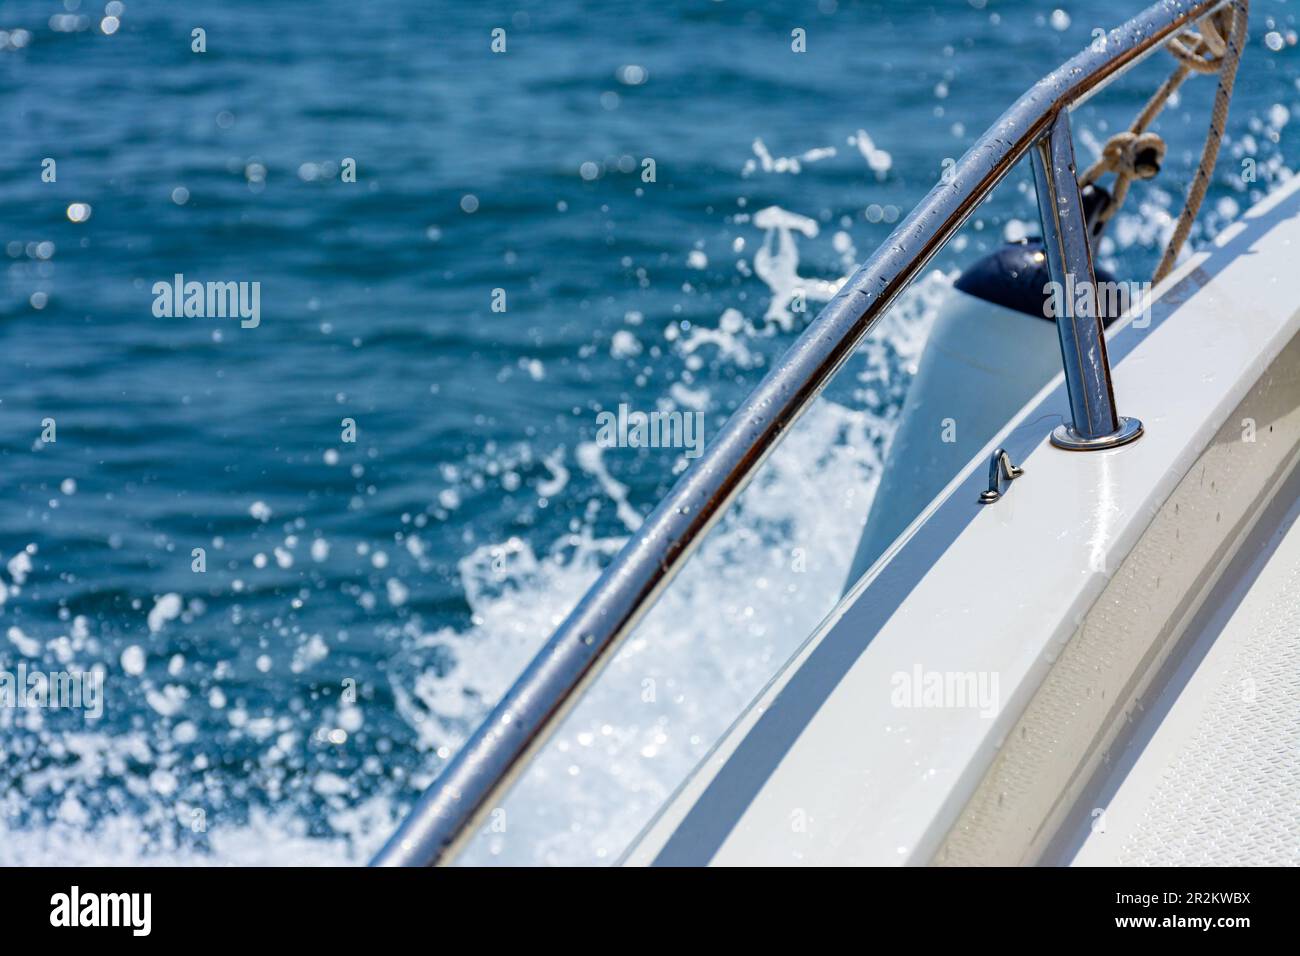 Port edge of a small recreational boat sailing in the sea, with outboard protection and water splashing Stock Photo